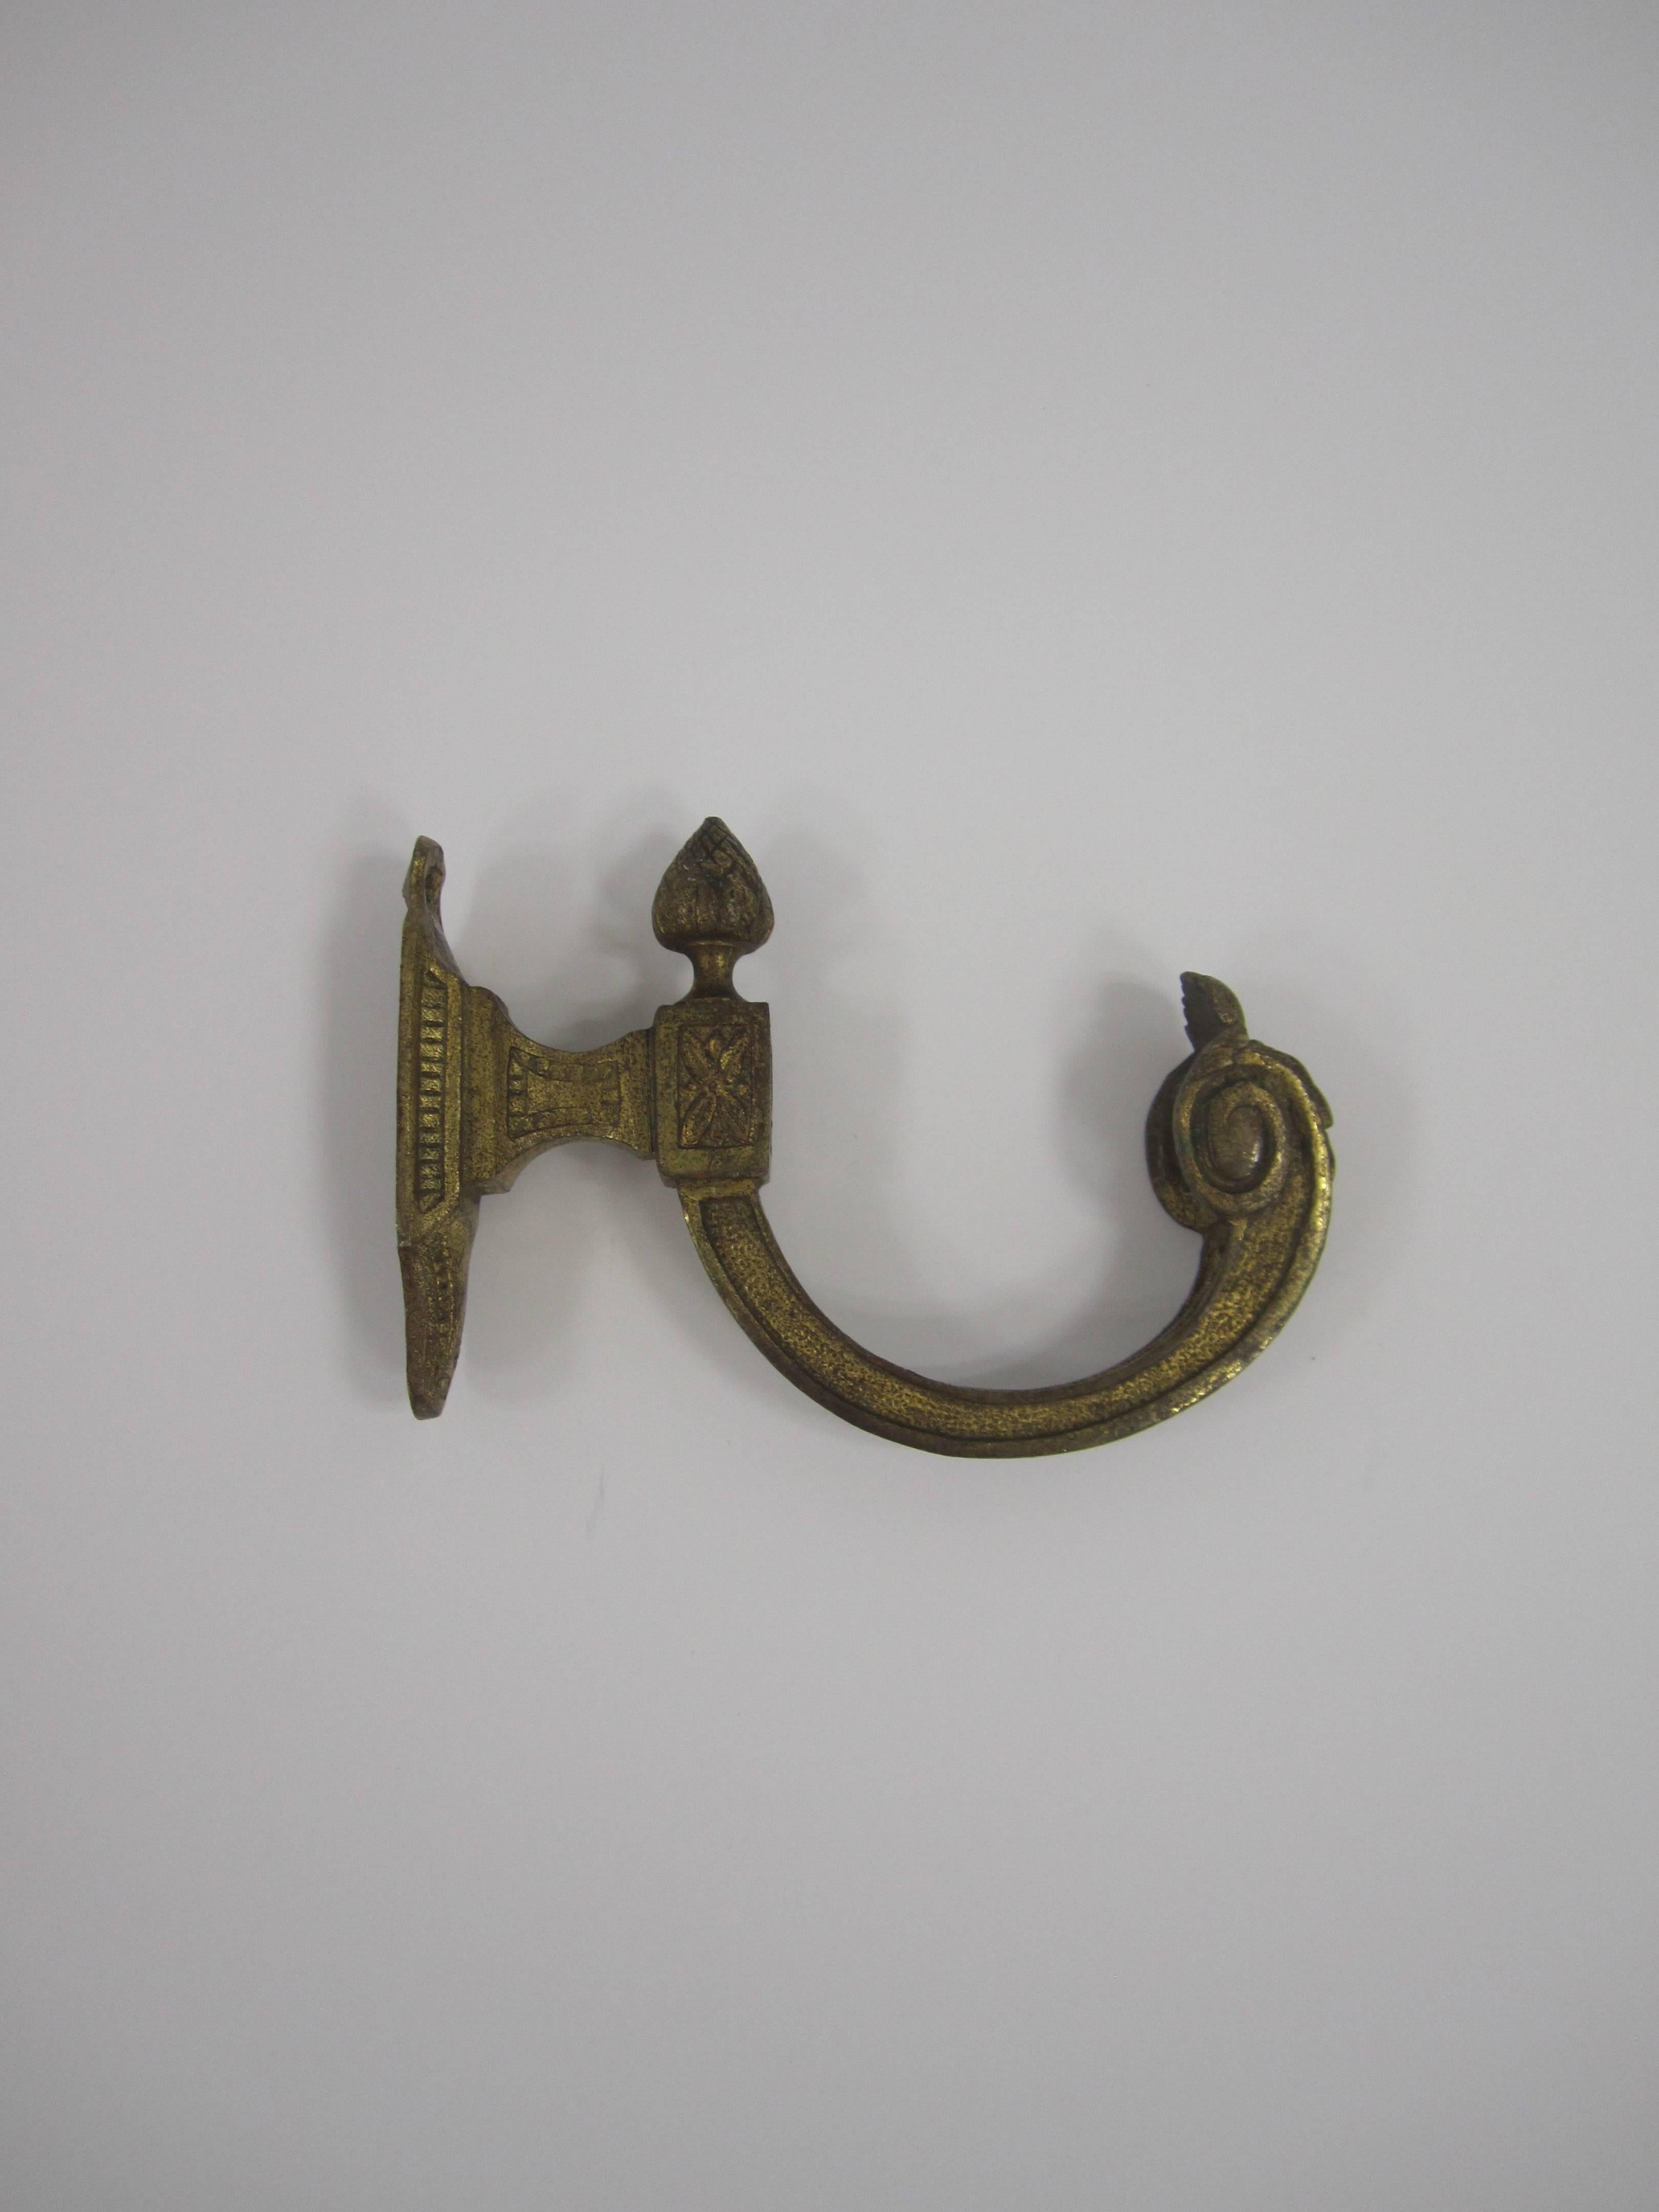 A substantial vintage gilded bronze French Louis XVI style hardware wall hook with beautiful details. 

Item available here online. By request, item can be made available by appointment to the Trade (in New York.).